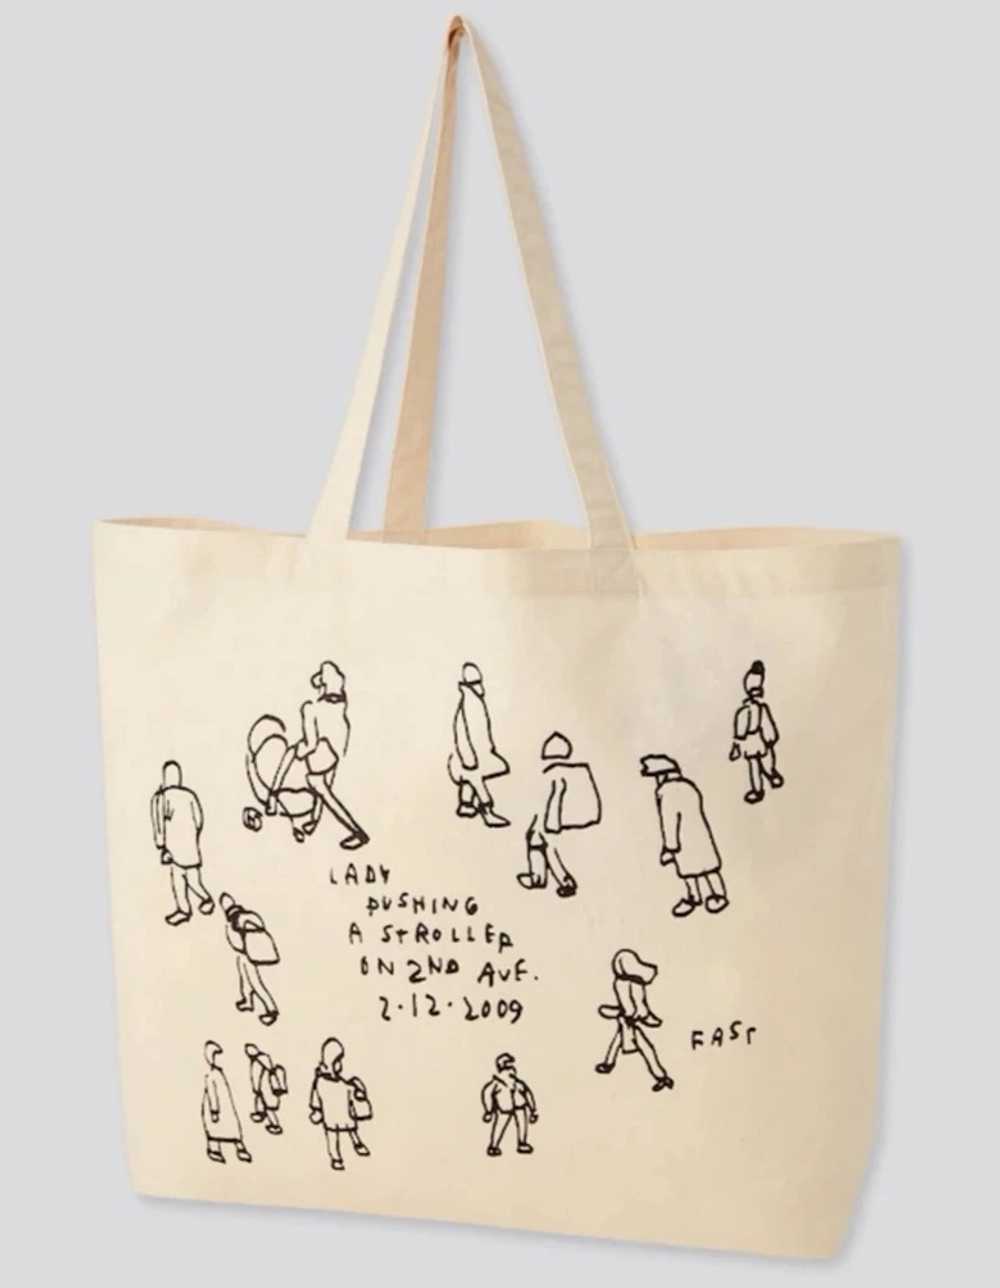 Outdoor Style Go Out! - New Jason Polan Tote Bag … - image 1